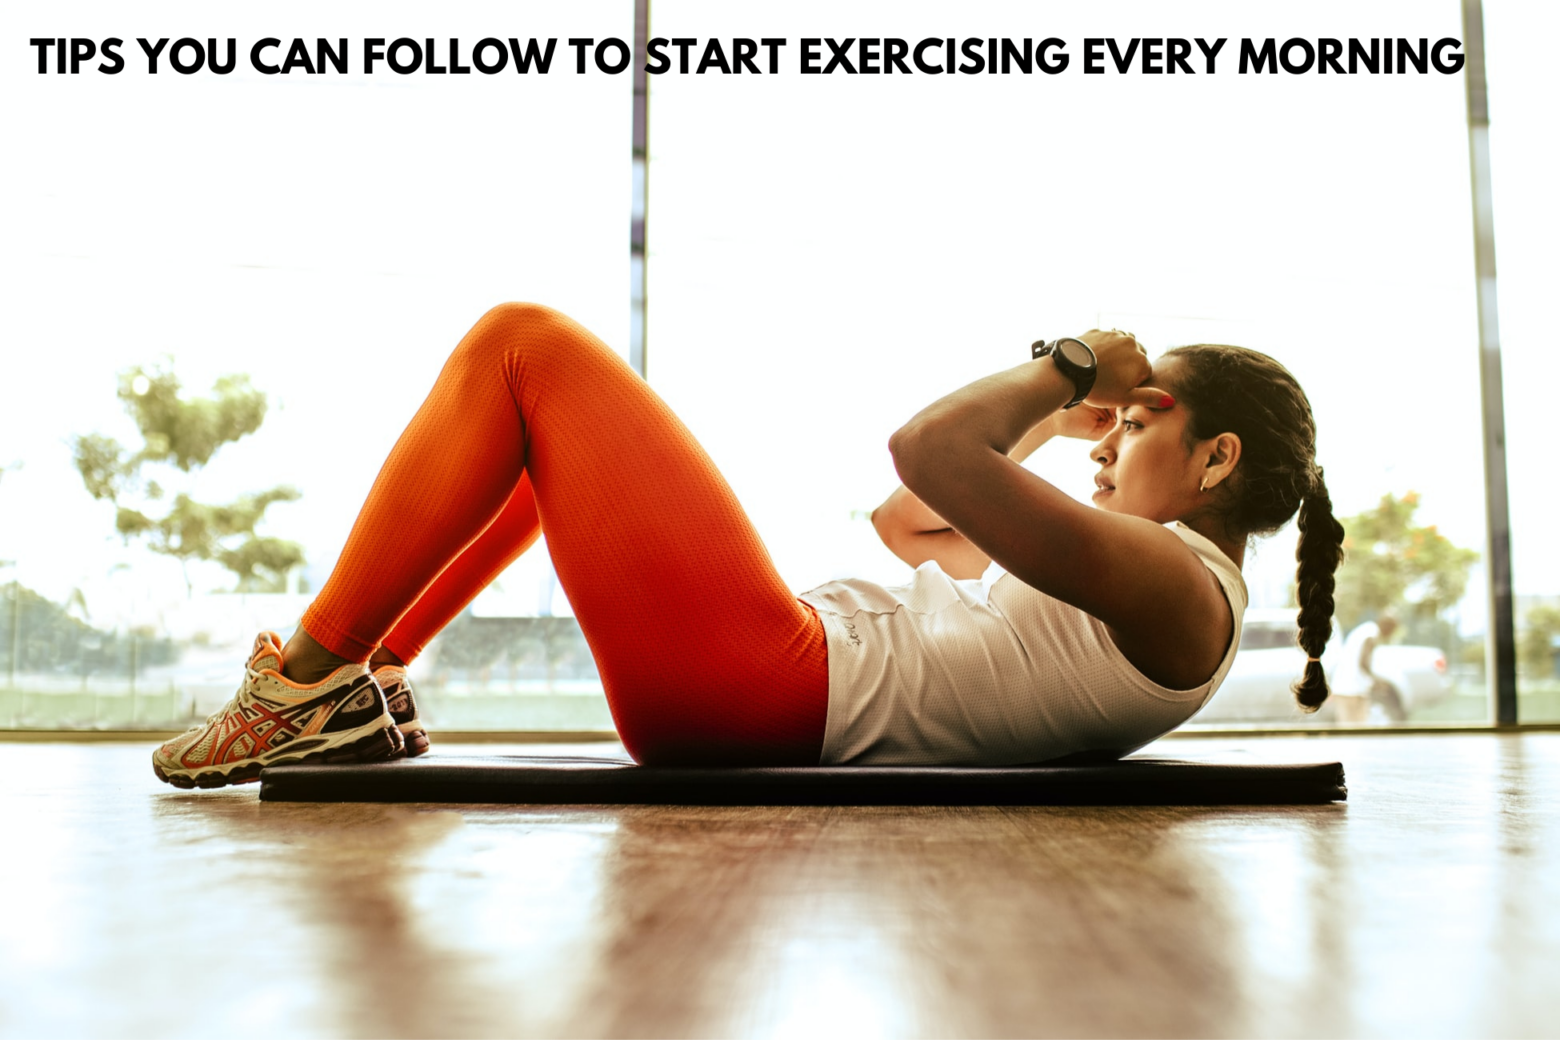 Tips You Can Follow to Start Exercising Every Morning